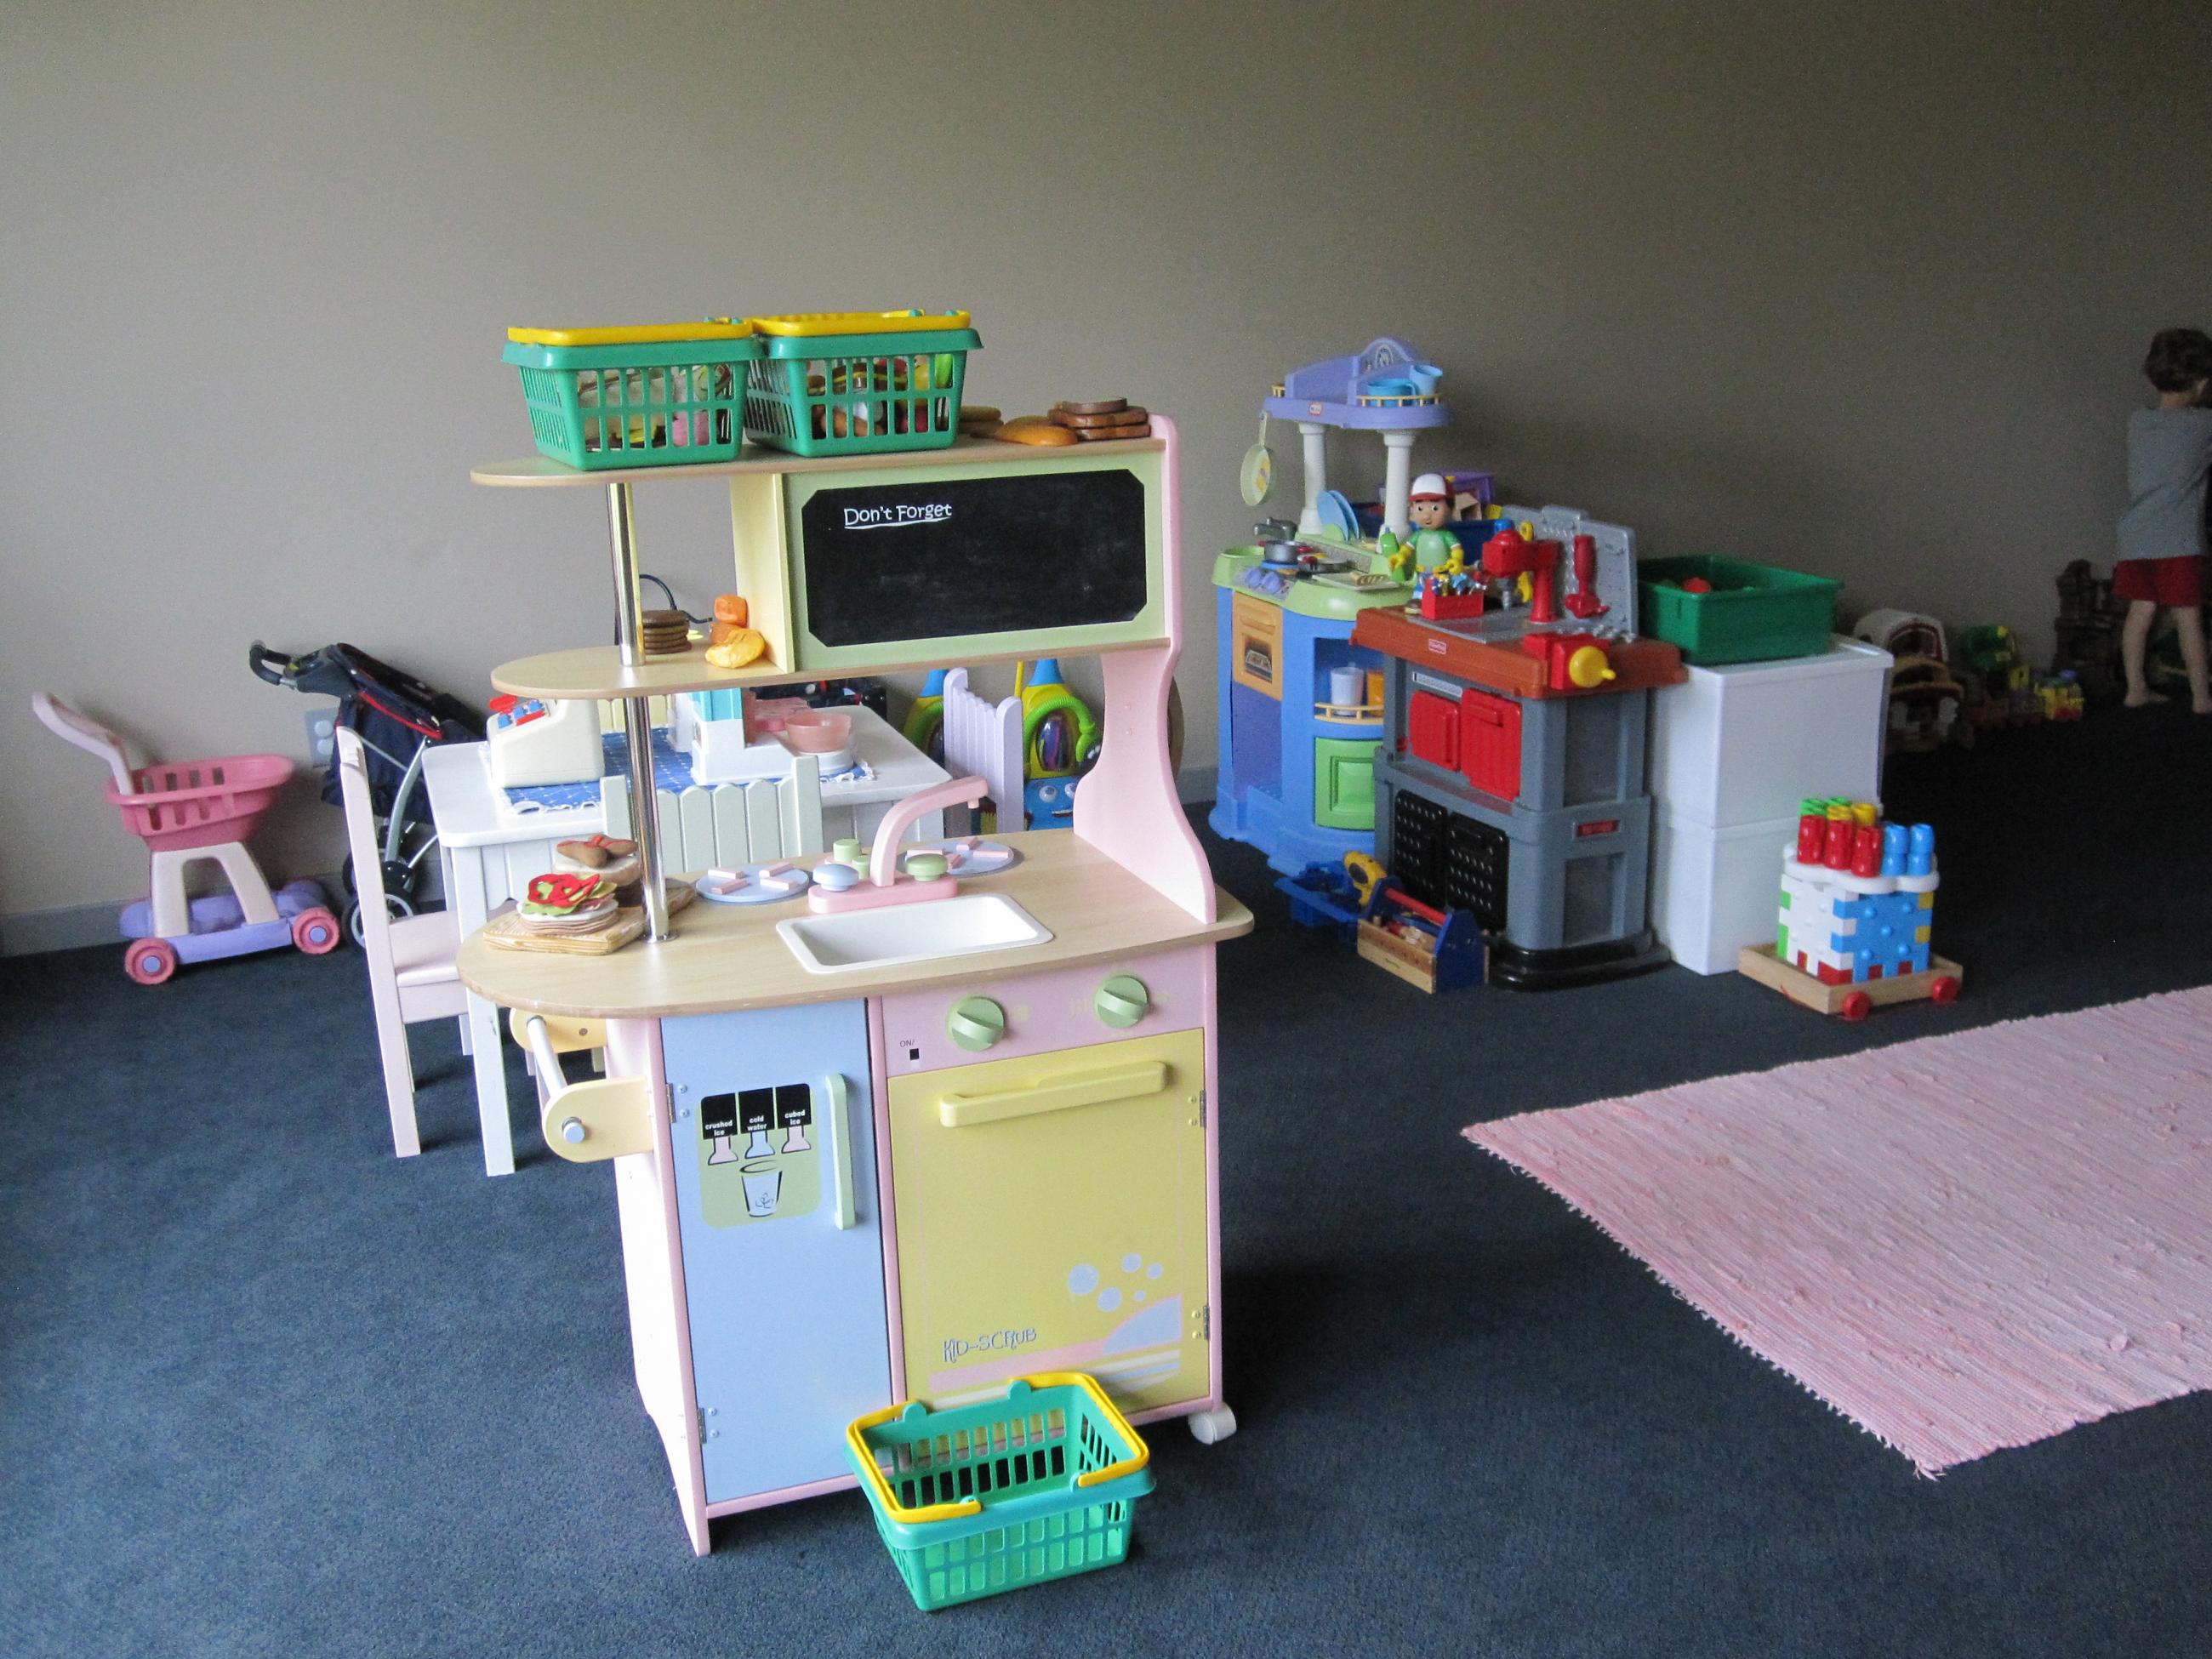 Daily life play area with house and workshop